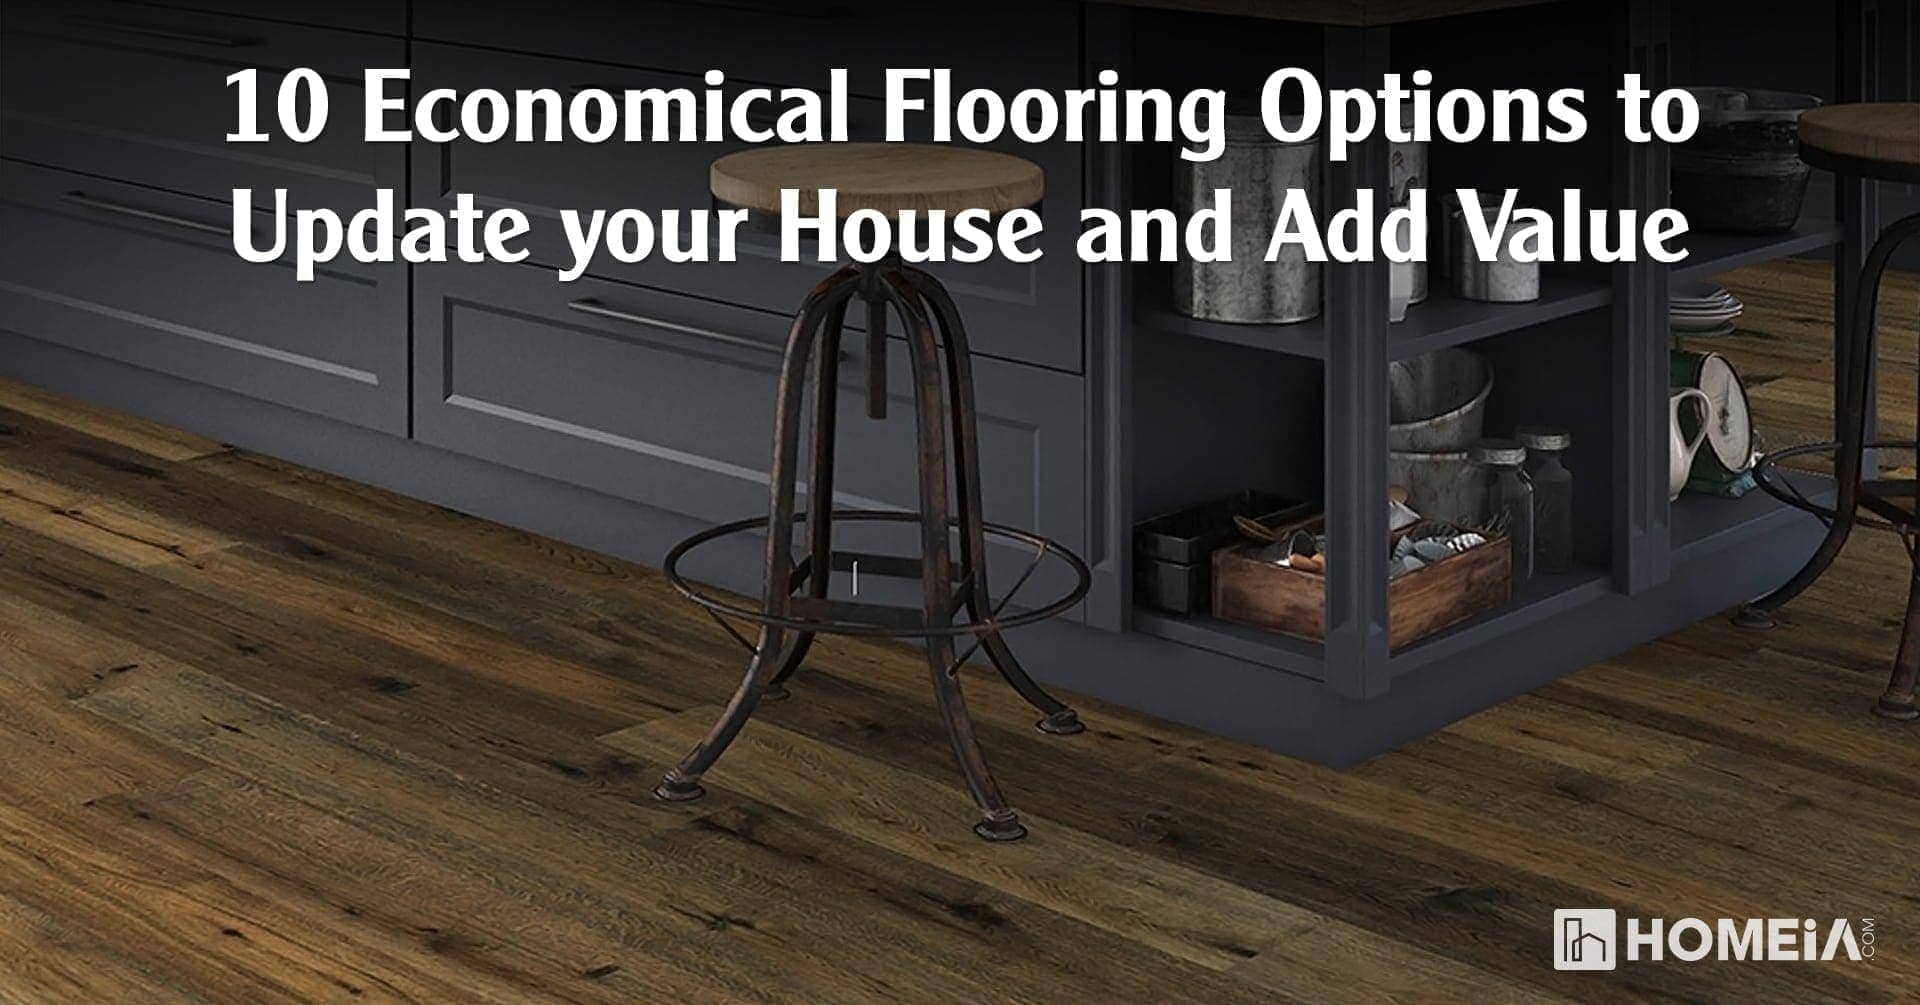 10 Economical Flooring Options To Update Your House Add Value Homeia,Happiest Cities In America 2019